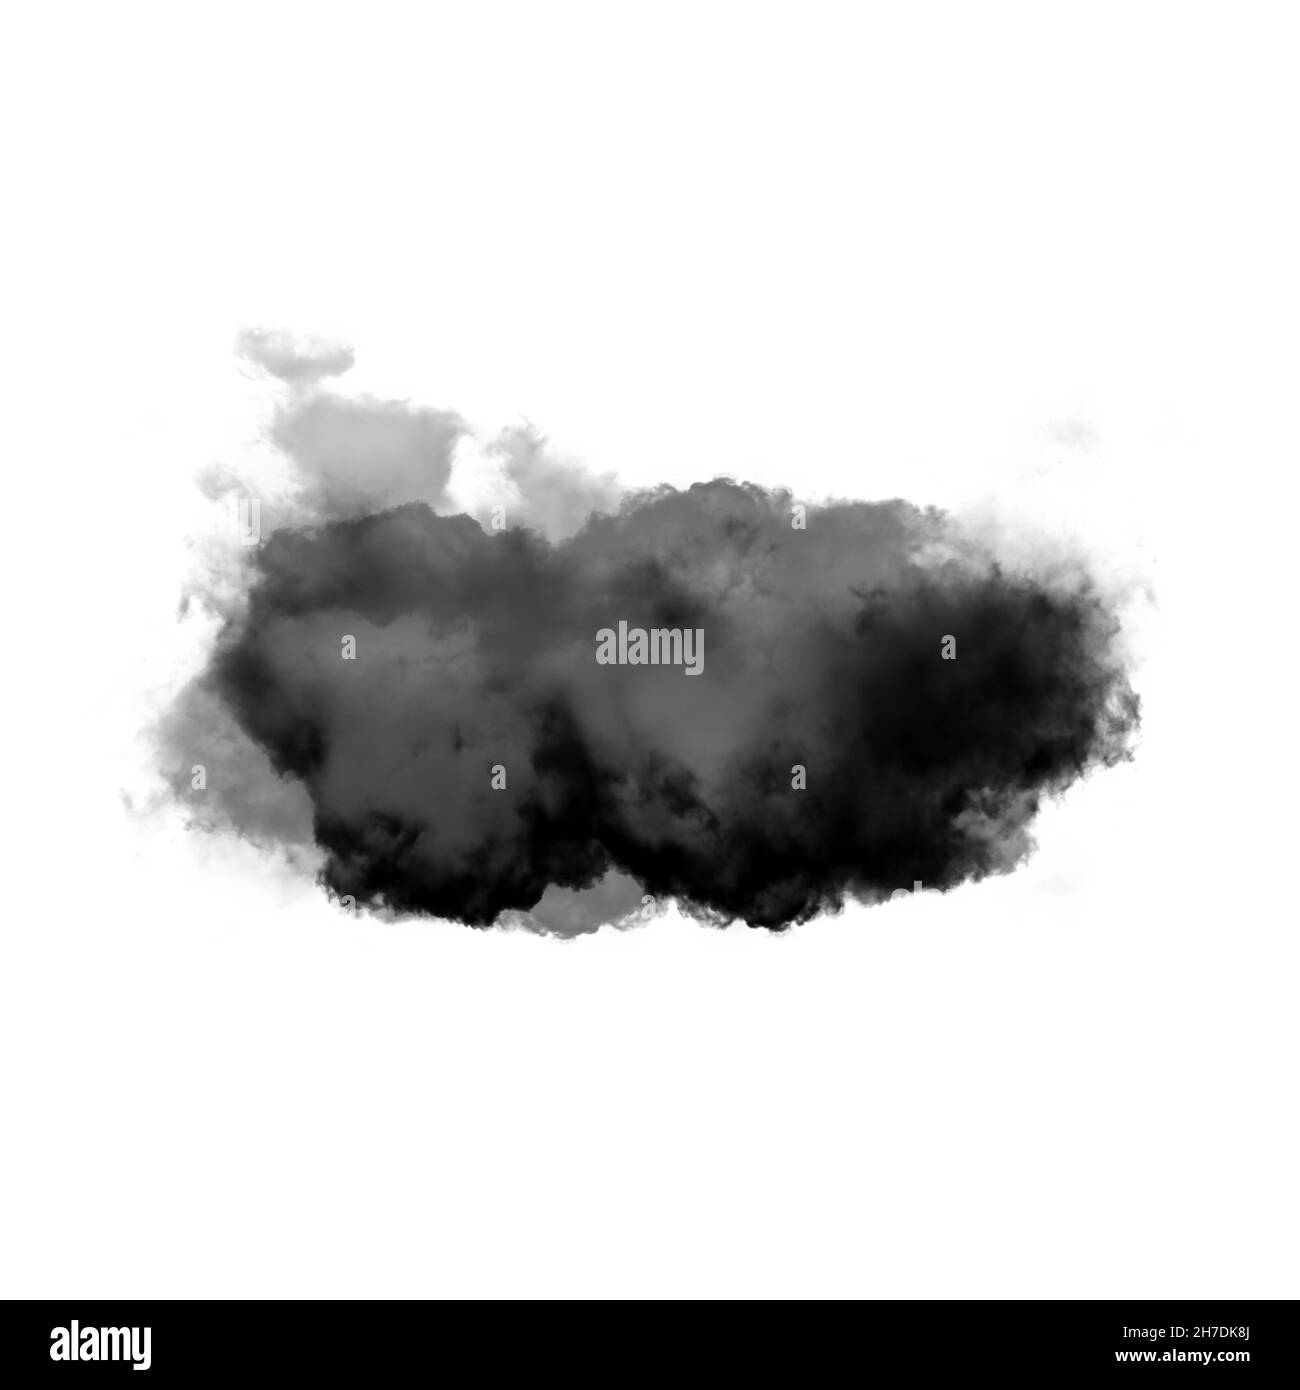 Black cloud of smoke isolated over white background 3D illustration, dirt or dust shape, natural smoke from fire Stock Photo